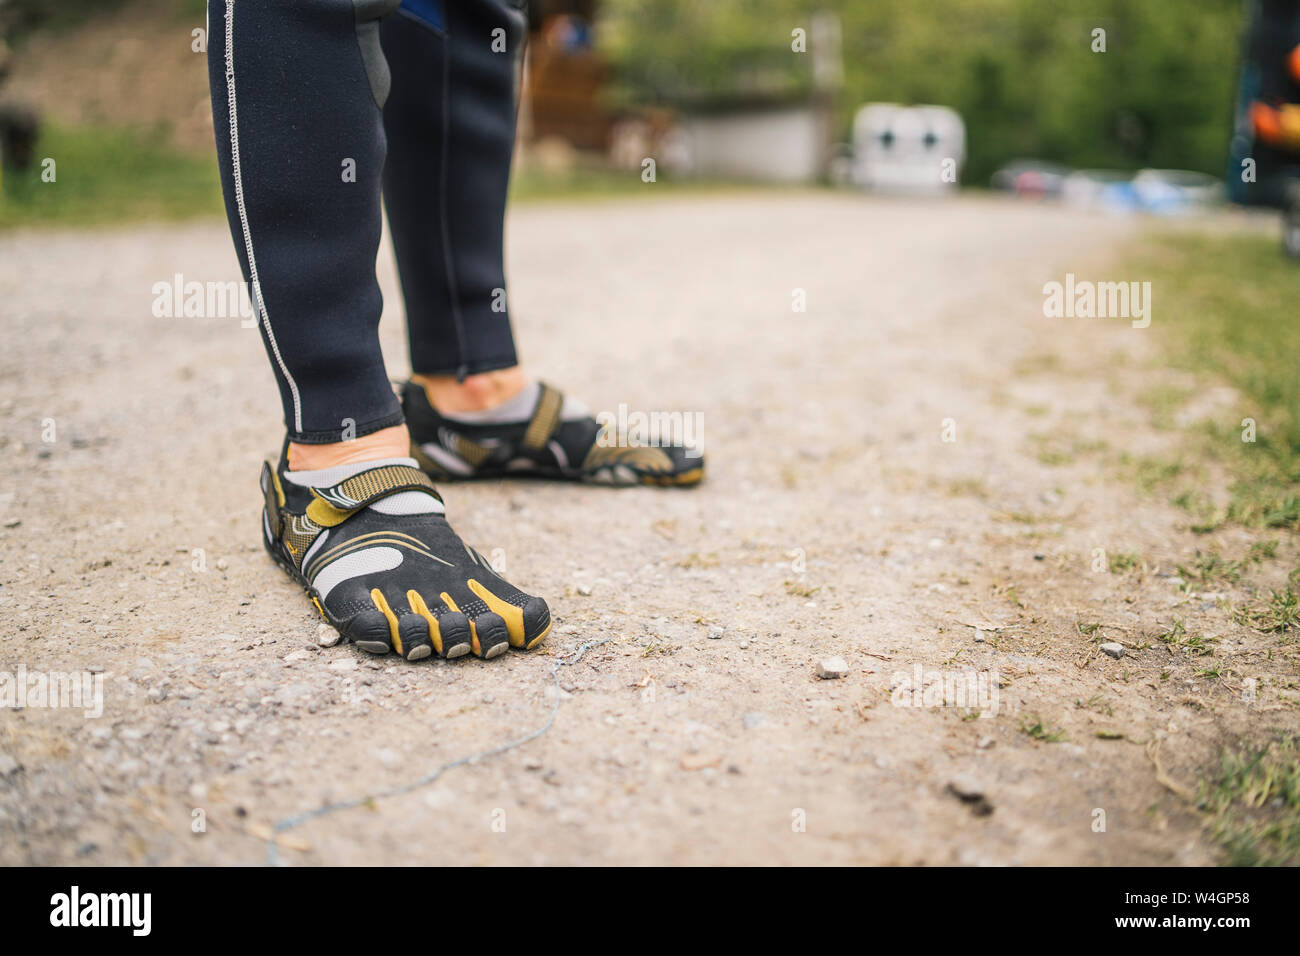 Close-up of man wearing wetsuit and galoshes standing on a path Stock Photo